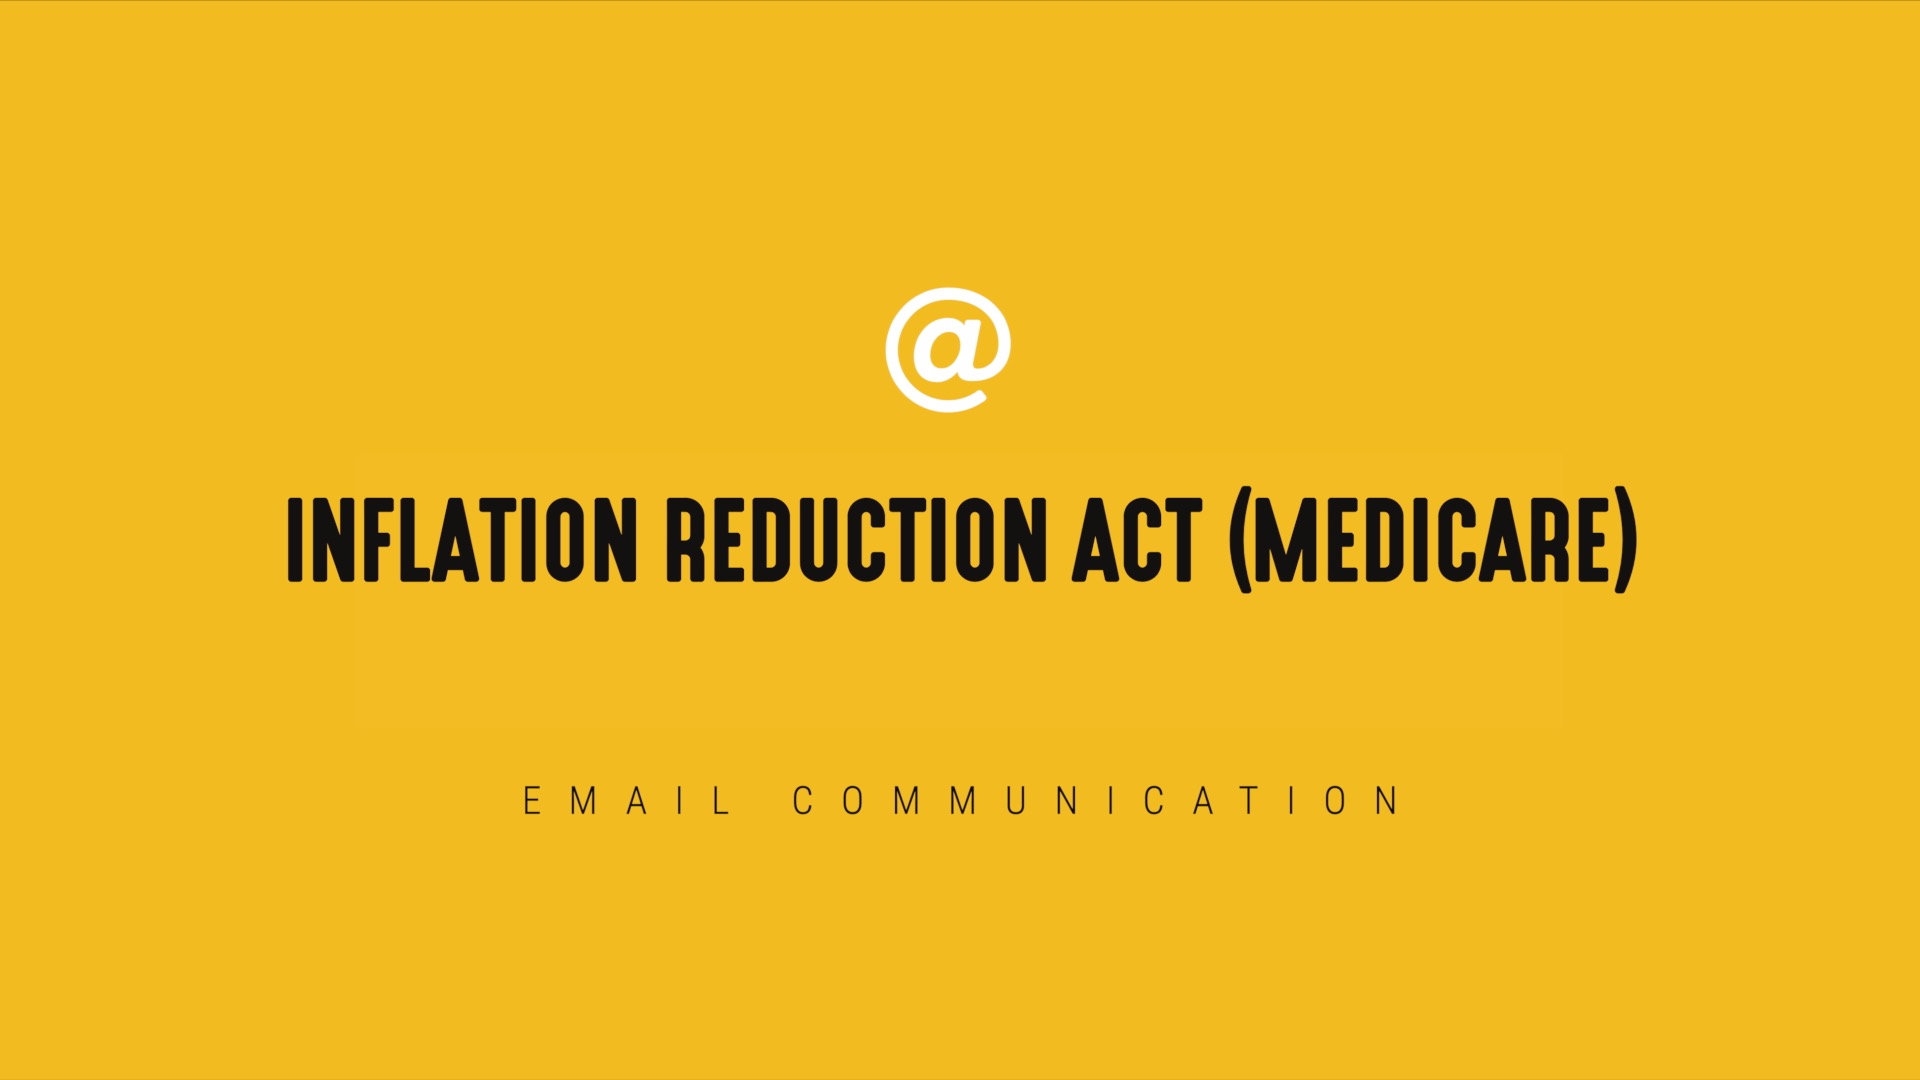 [NEW] Inflation Reduction Act (Medicare) Timely Email